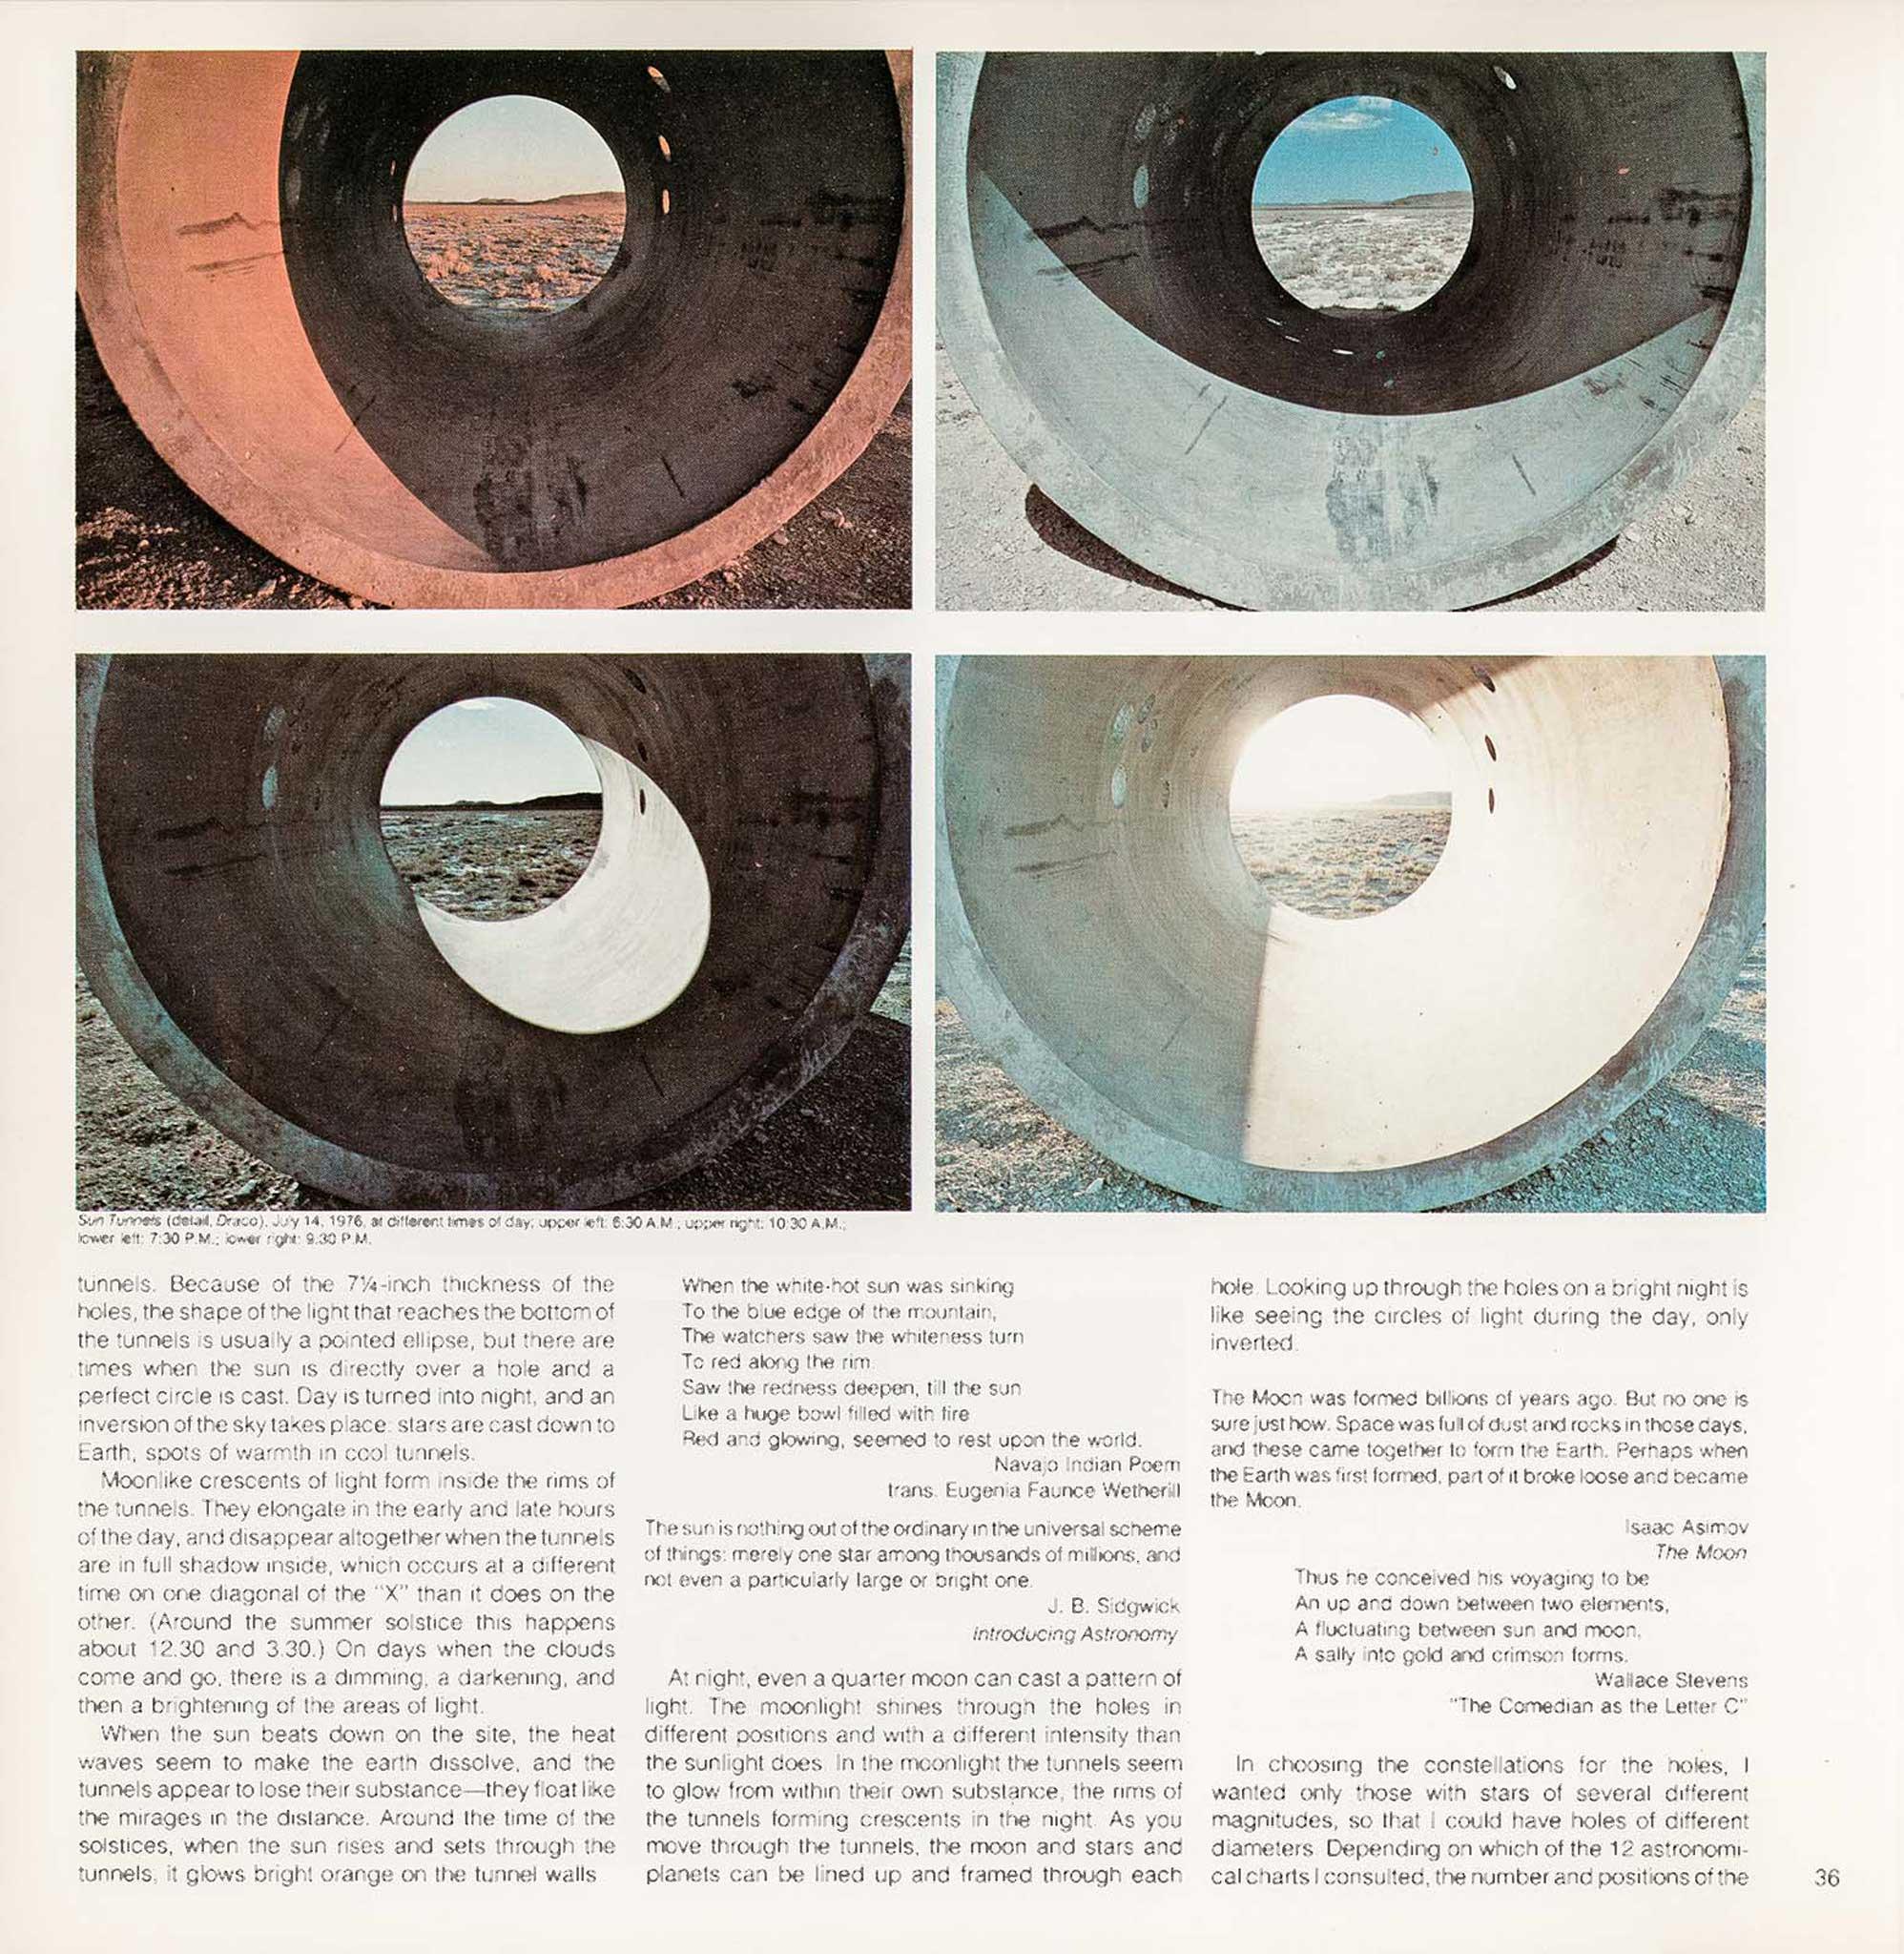 Magazine layout with four images in a grid on the top and text on the bottom. Images show changing light throughout the day inside large circular concrete tunnels.